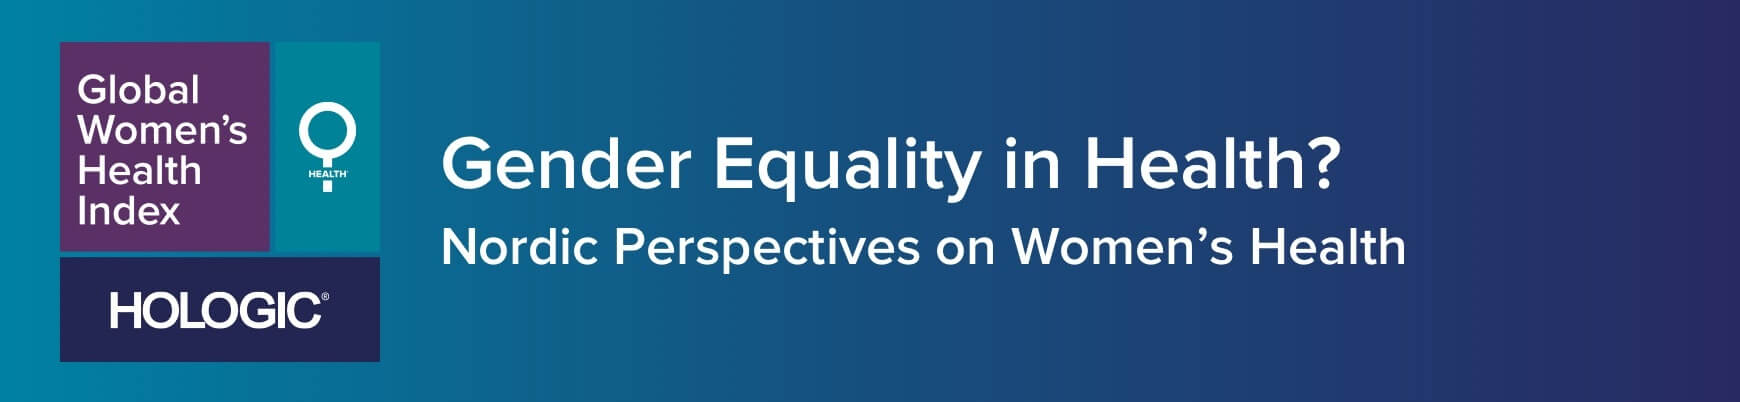 Gender Equality in Health? – Nordic Perspectives on Women’s Health